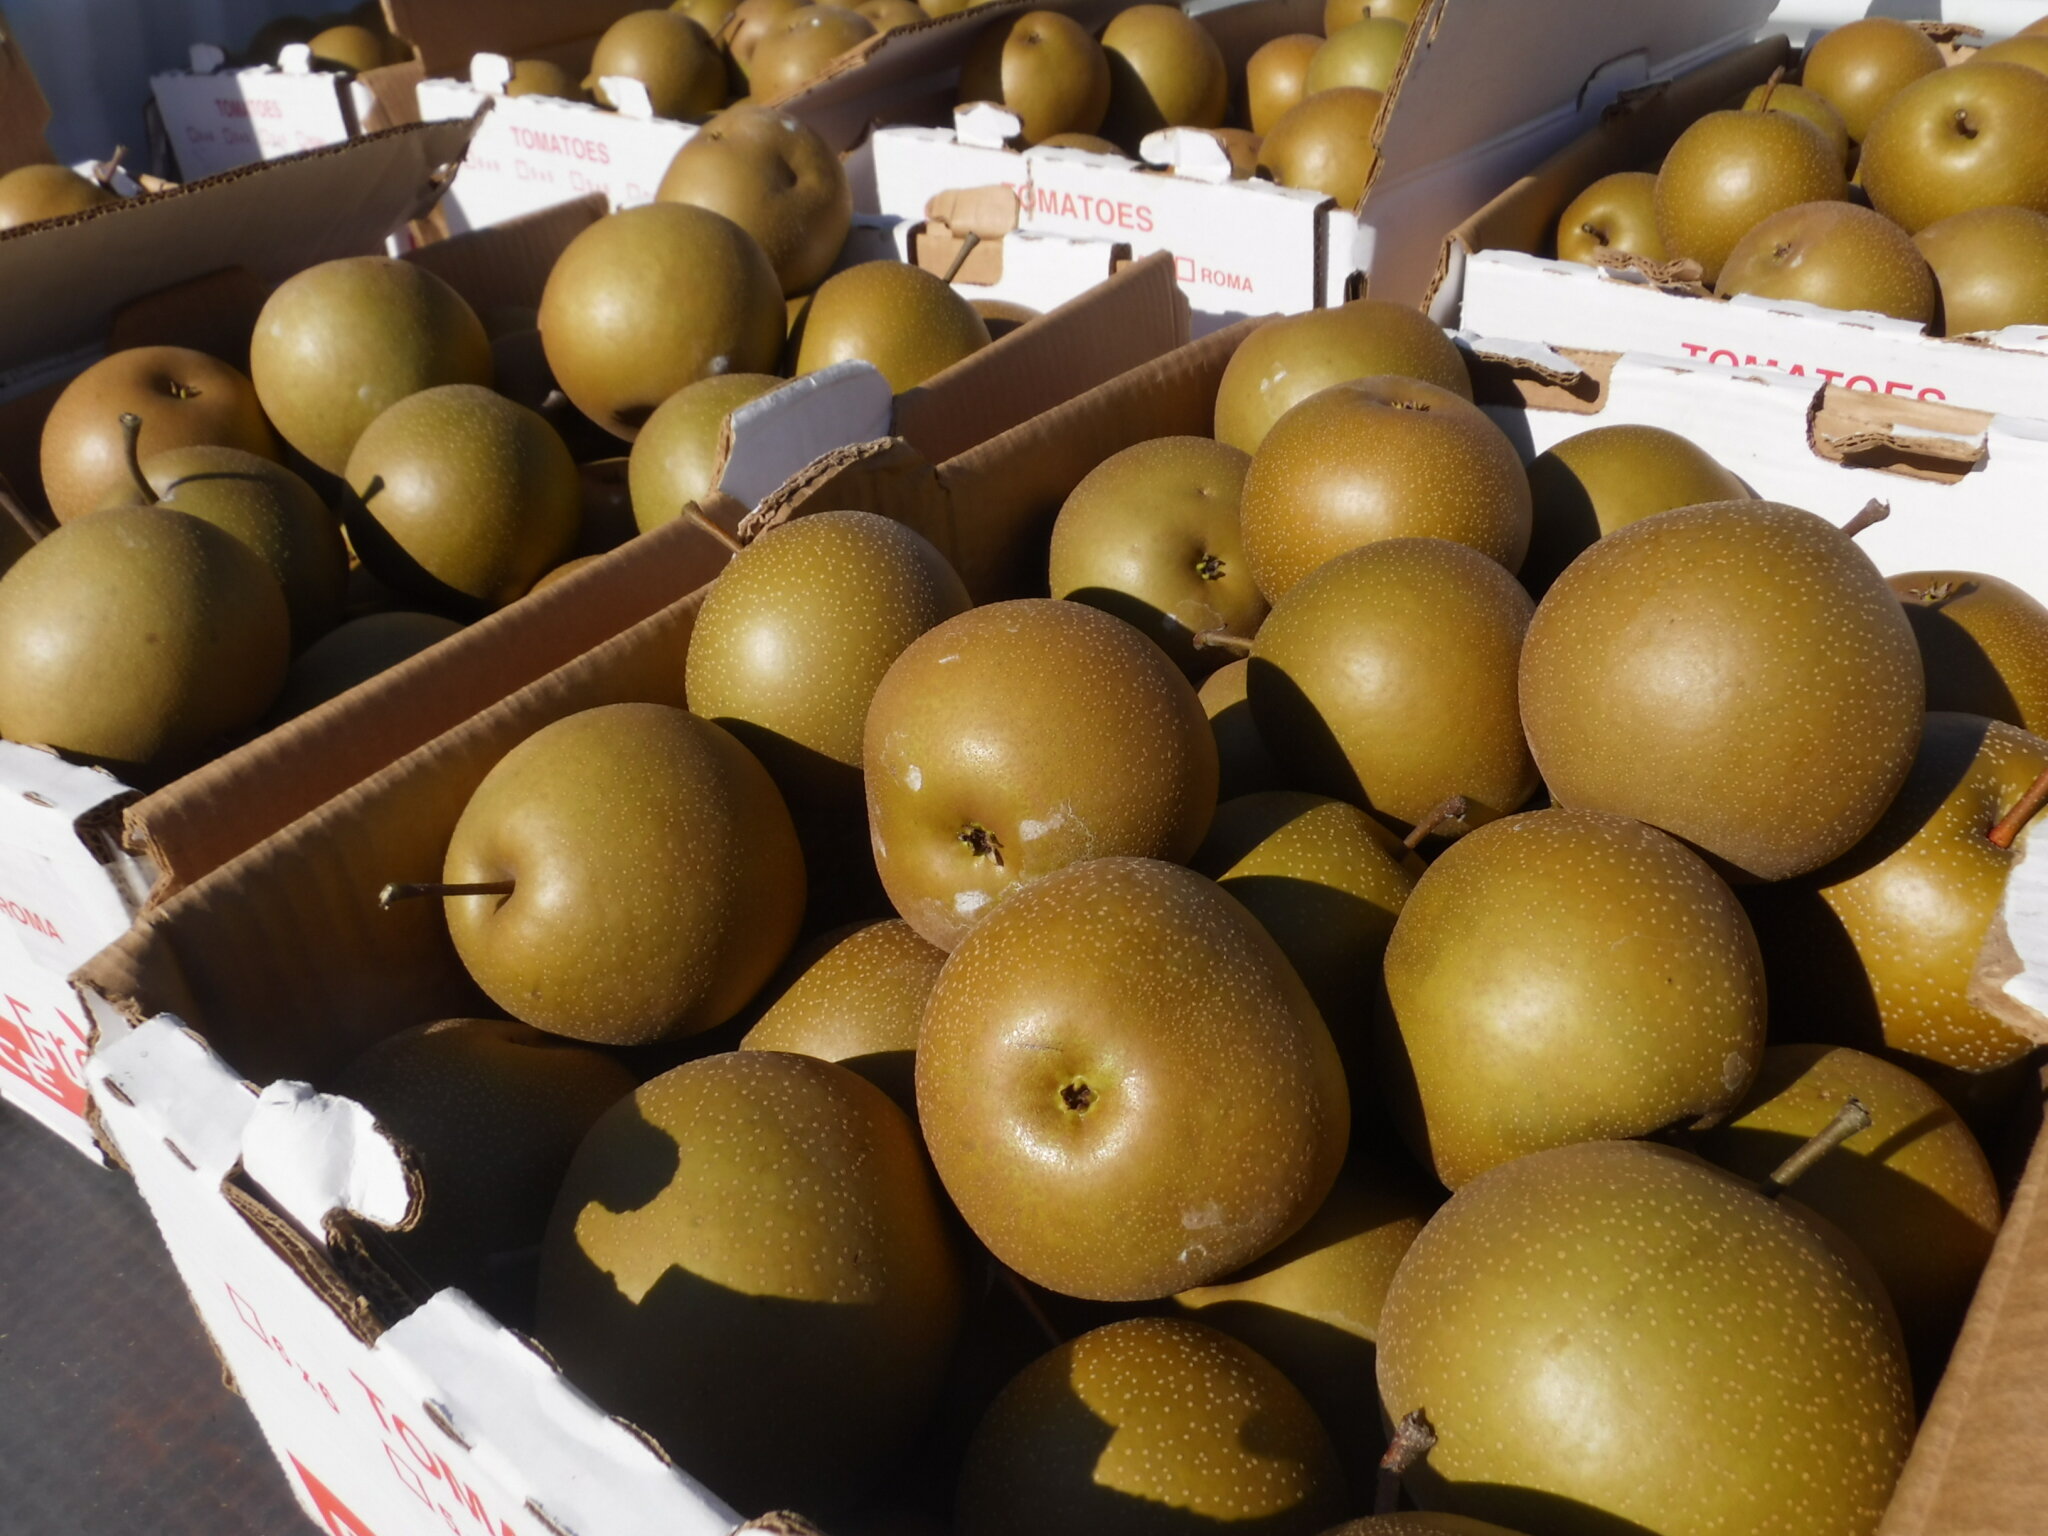 Pears from David Doud’s Countyline Orchard.